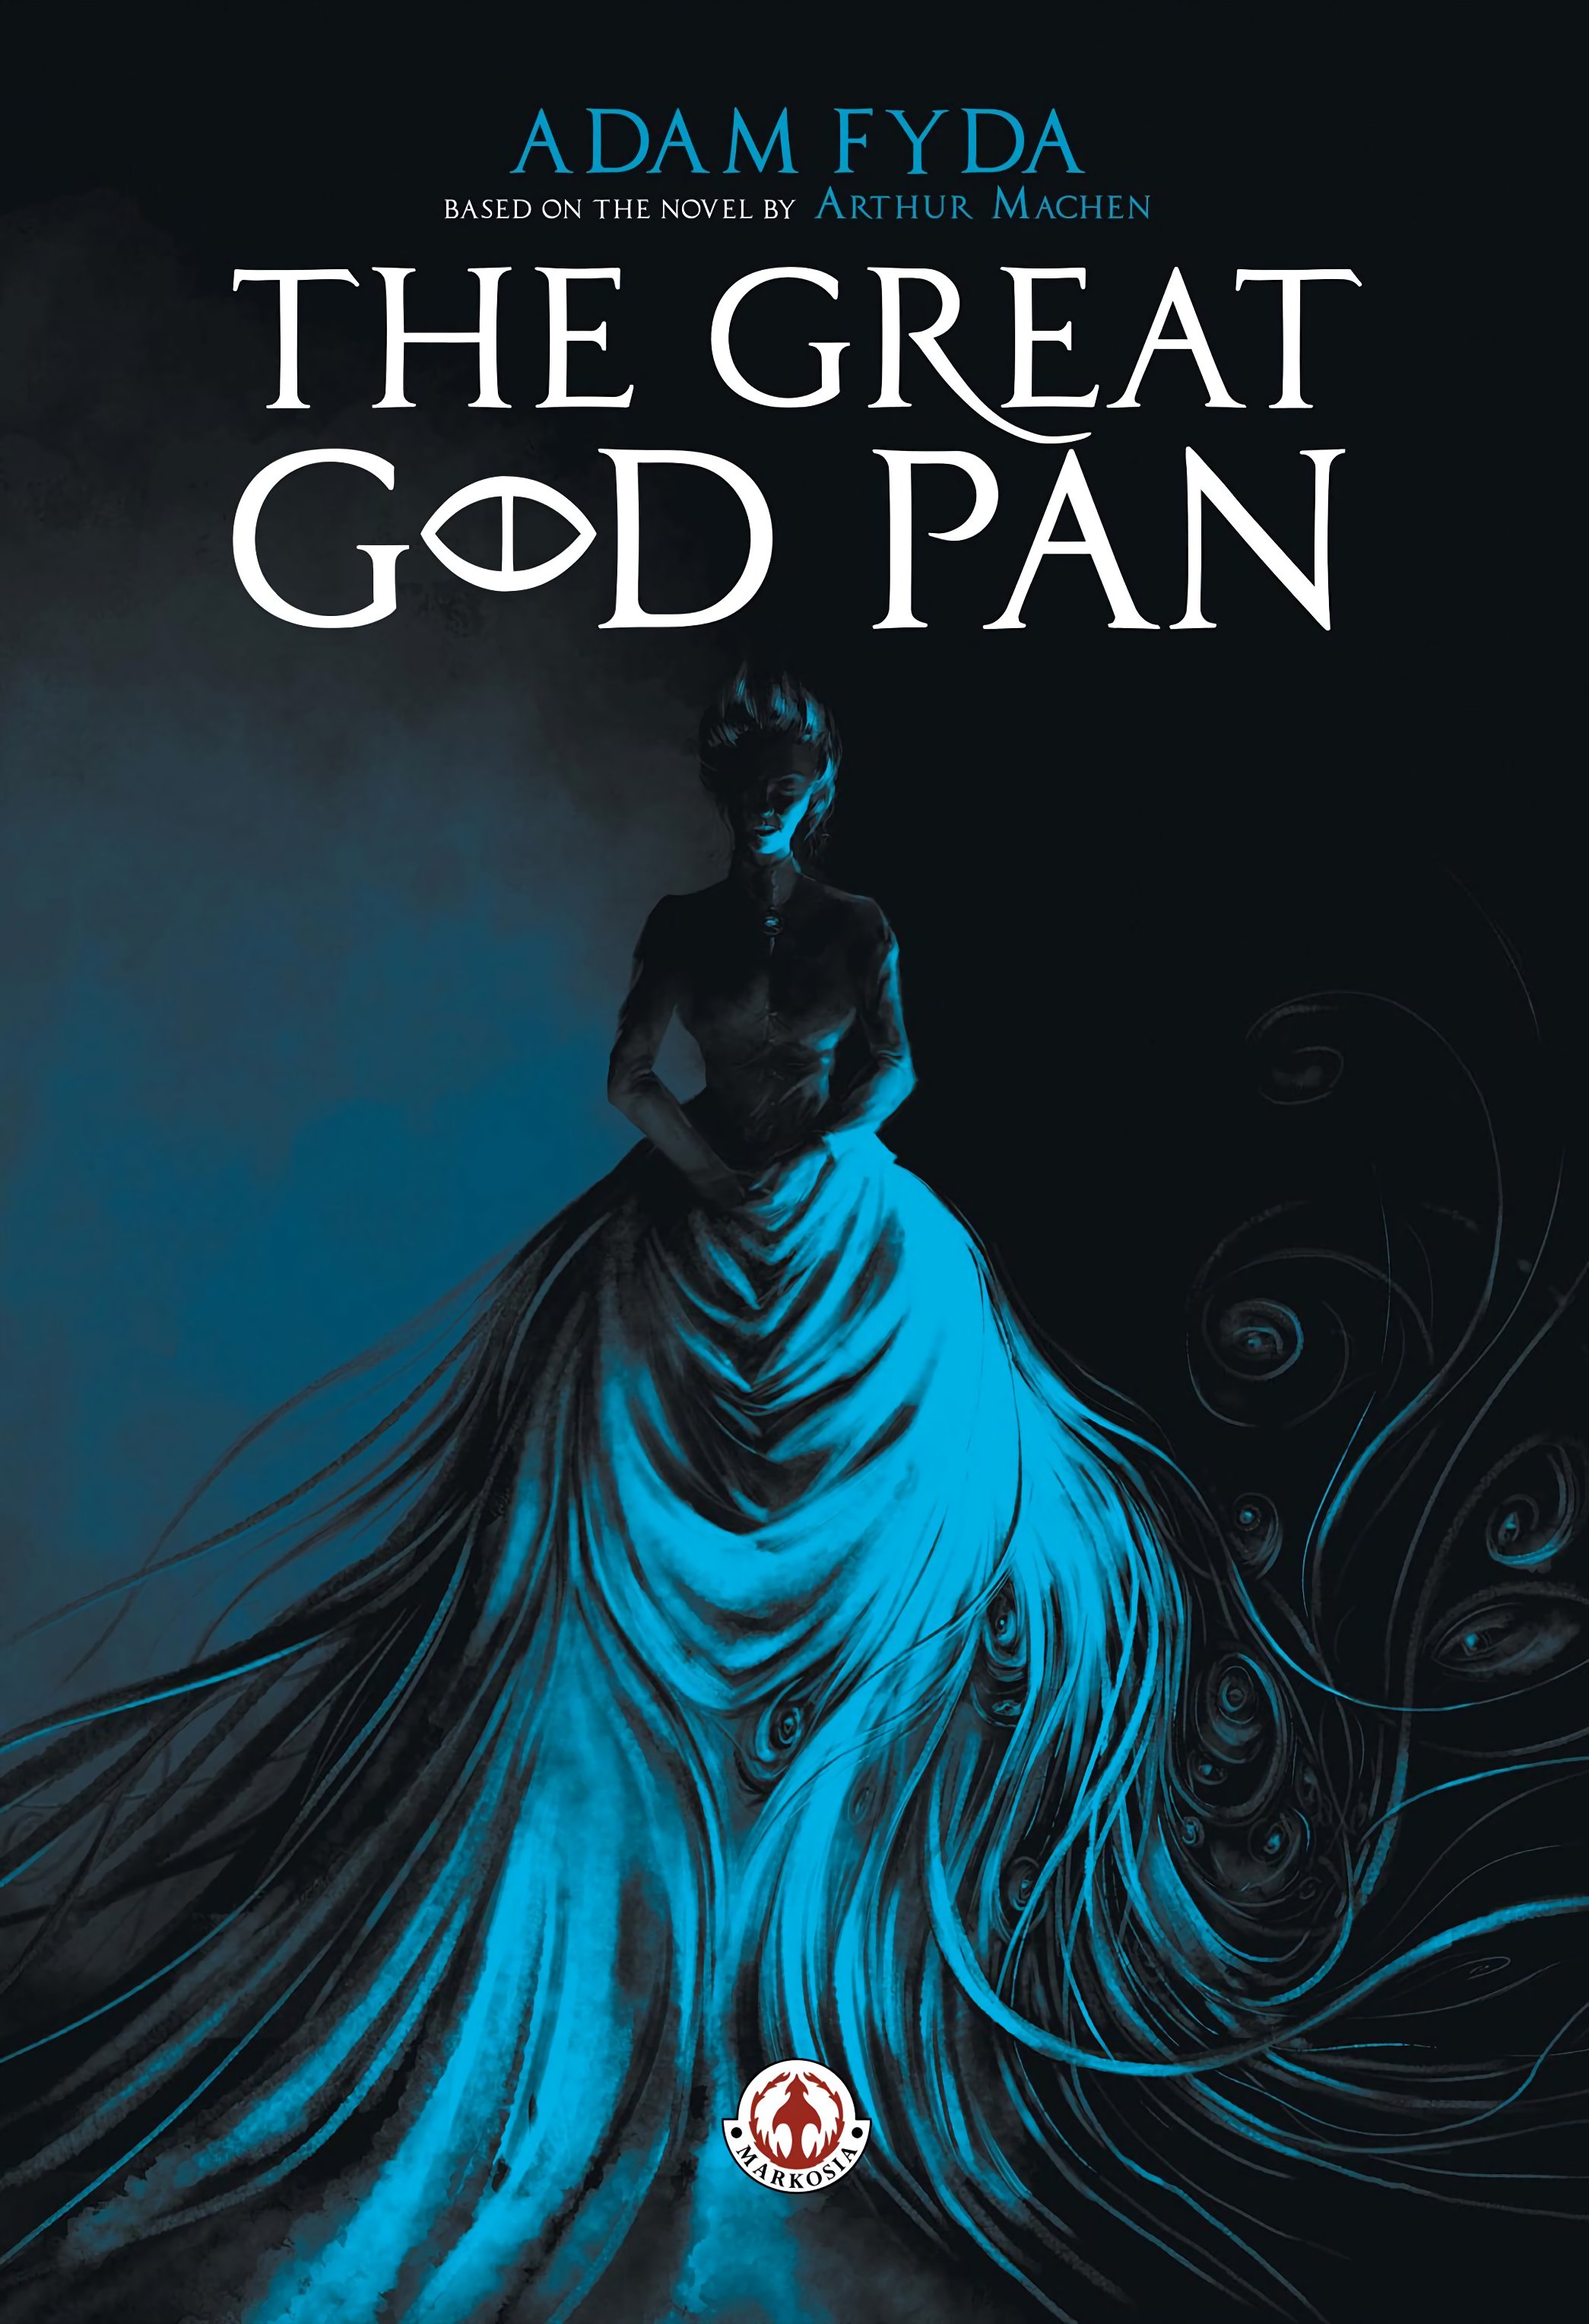 Read online The Great God Pan comic -  Issue # TPB - 1